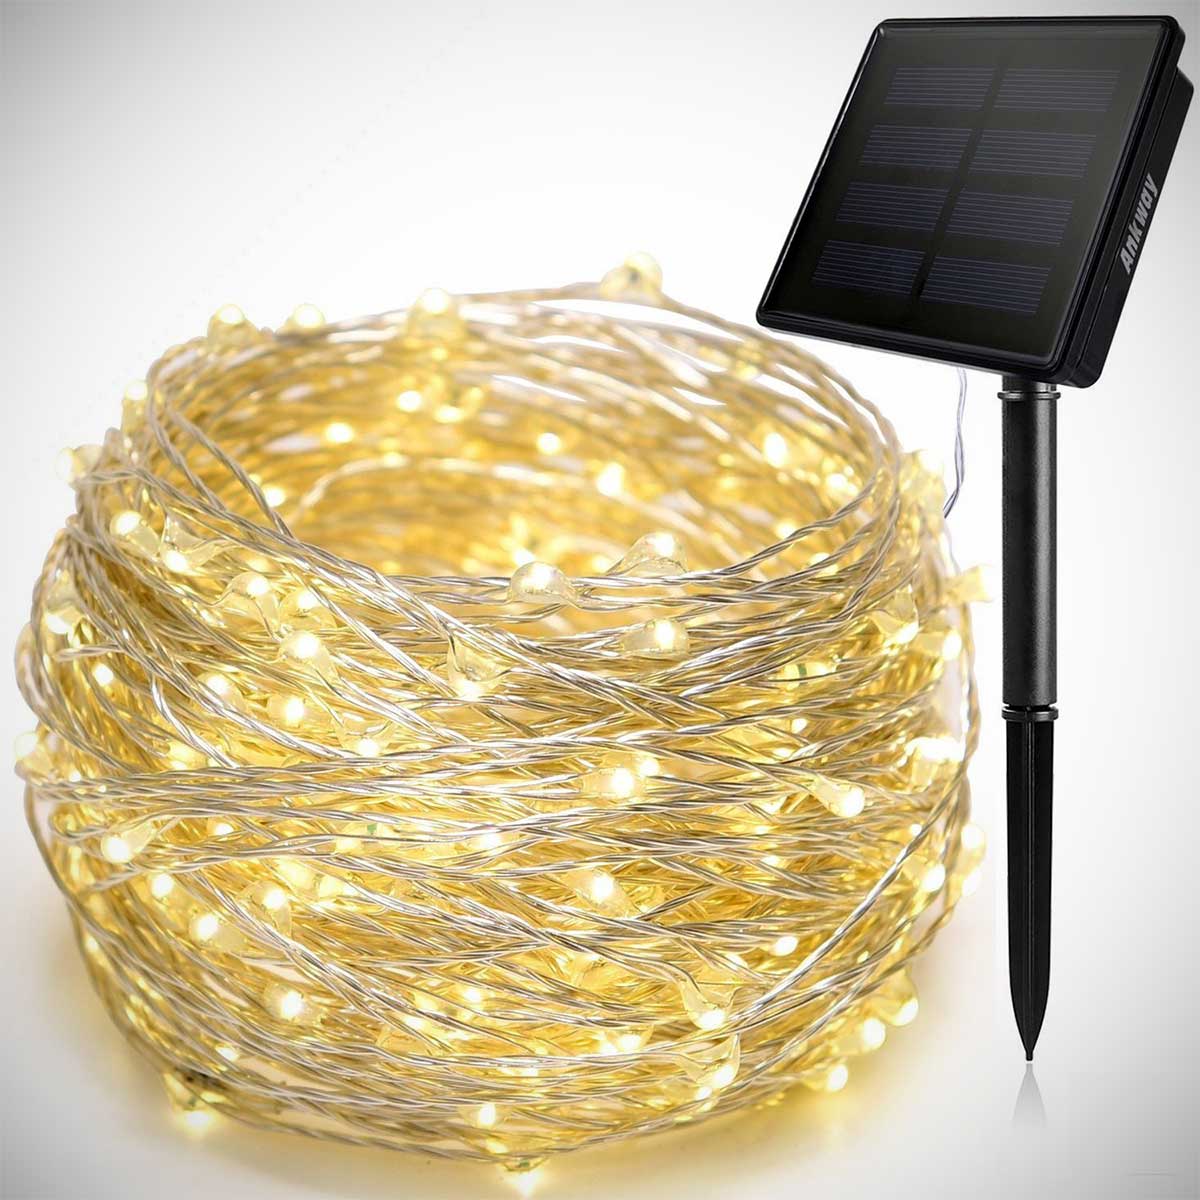 JUMKEET Solar String Lights 10m/33ft LED Fairy Lights Waterproof Copper Wire Lights 2 Modes Outdoor Lights for Christmas Party Wedding Garden Patio Home Decorative Festival Auto On Off Warm White